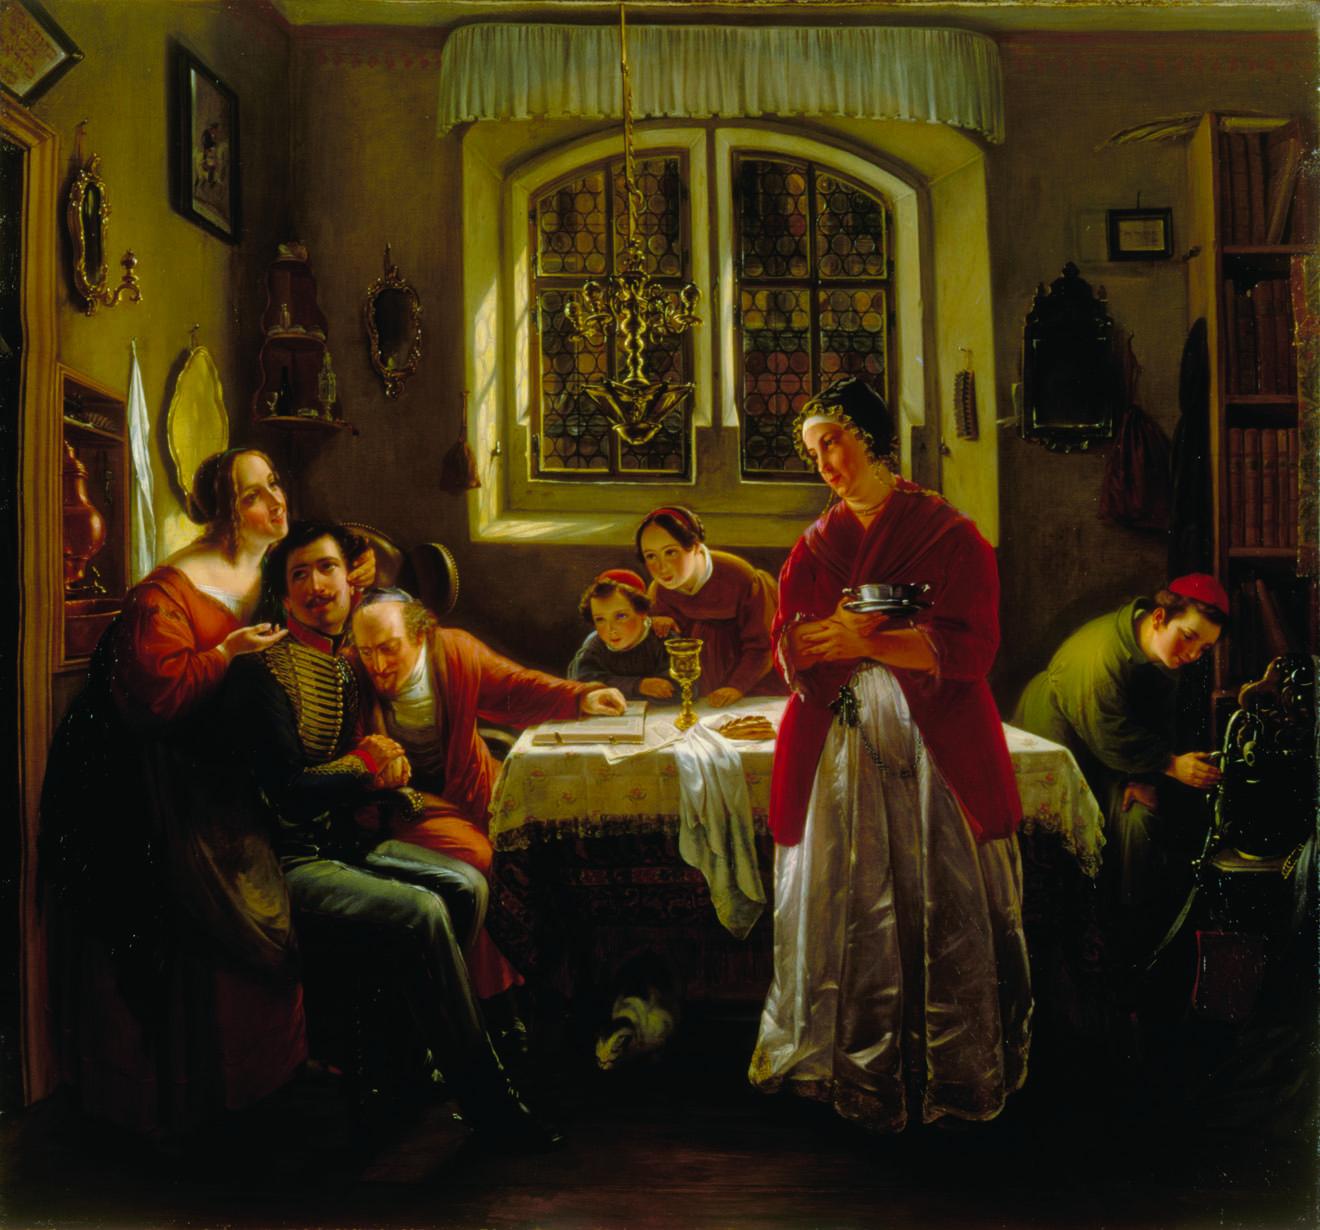 Painting of soldier in uniform seated at table surrounded by men, women, and children.